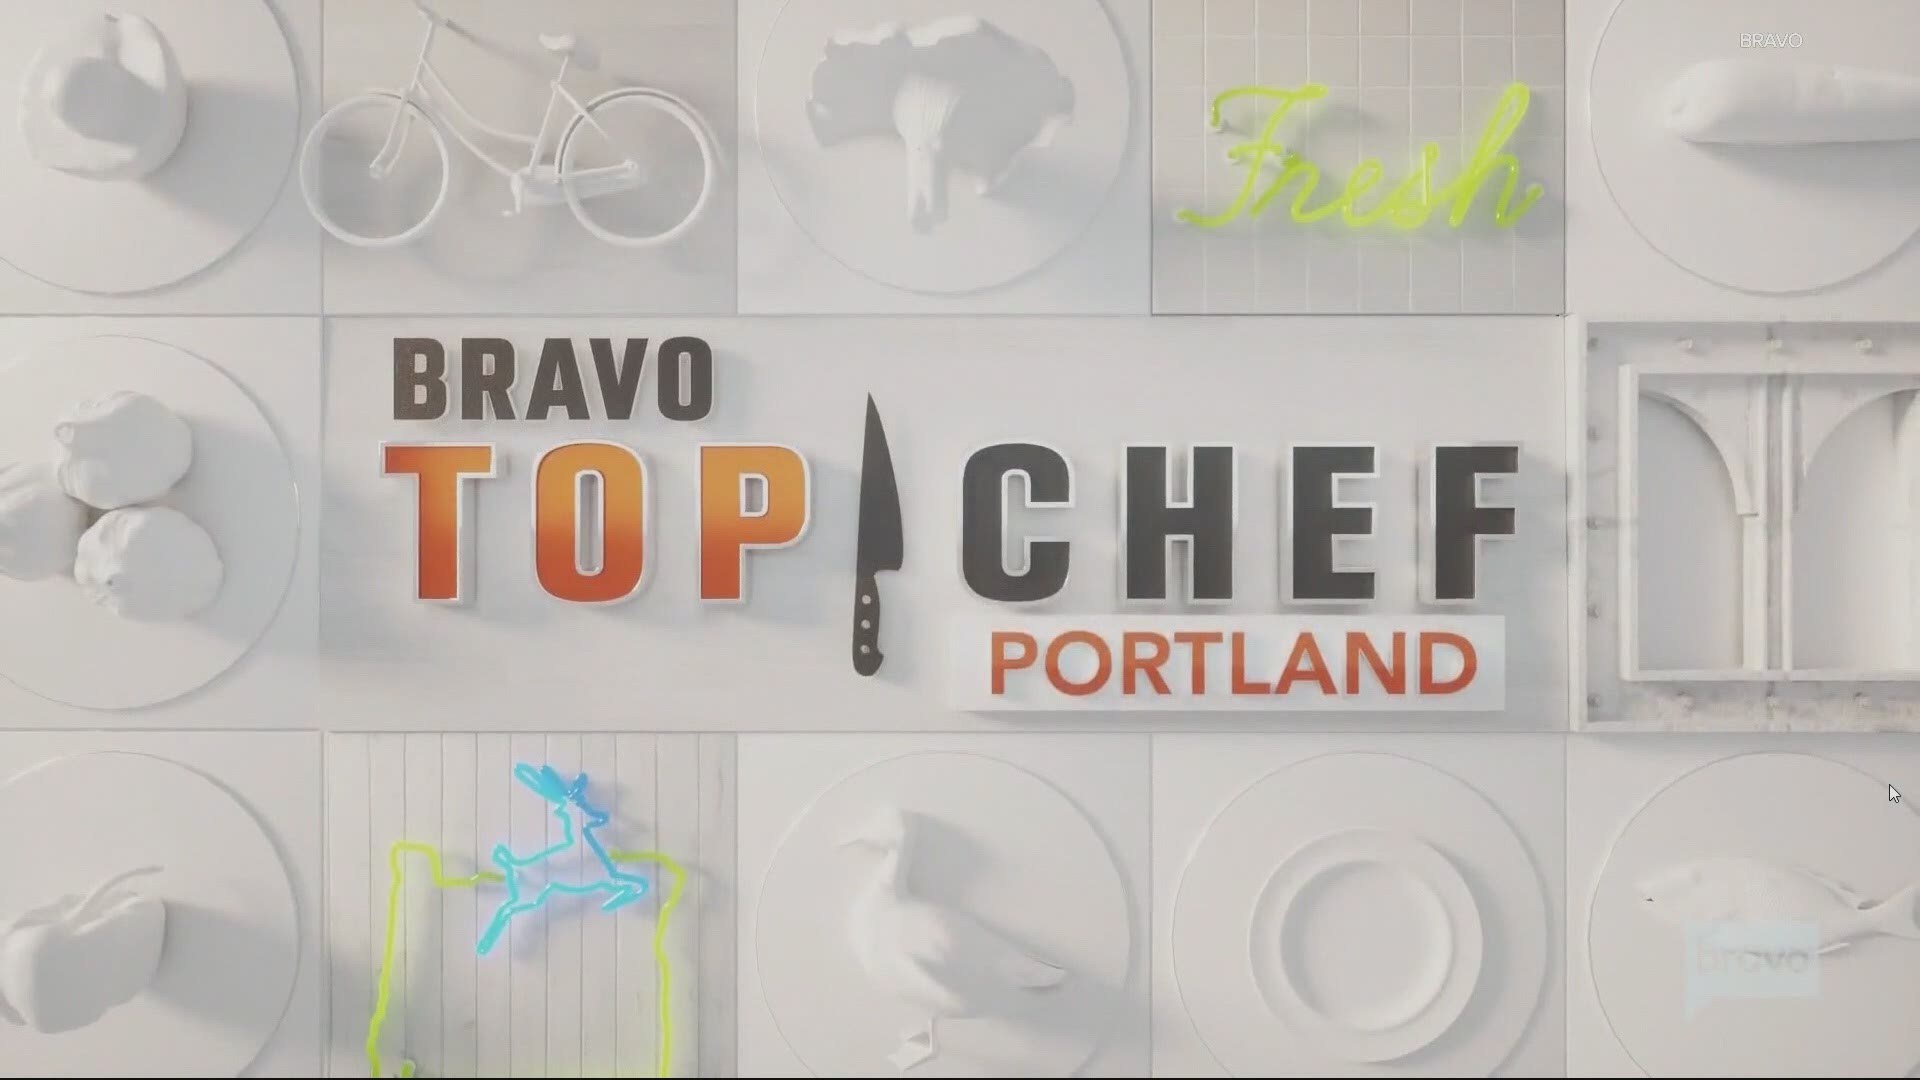 Top Chef is a competition show pitting 15 chefs from around the country, including two from our area, against each other in fun and crazy cooking challenges.